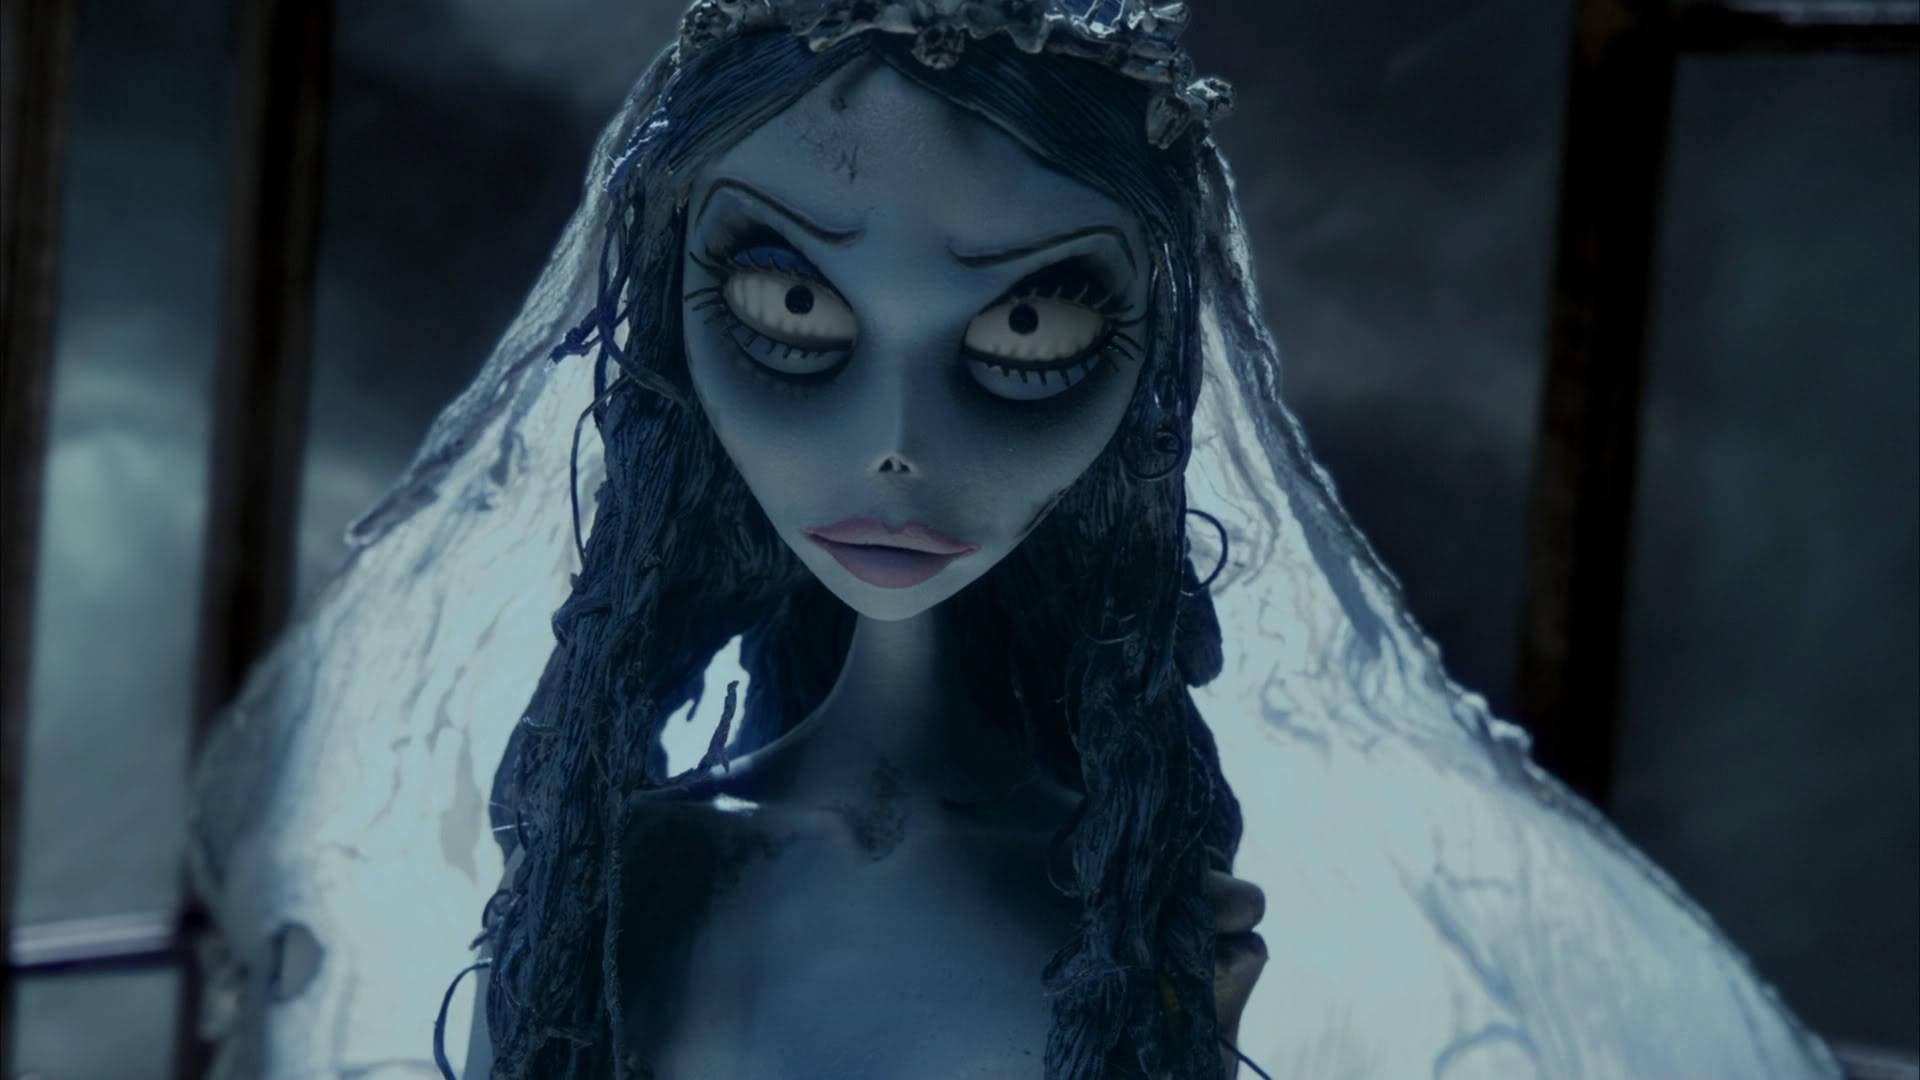 Corpse Bride Angry Face Wallpaper